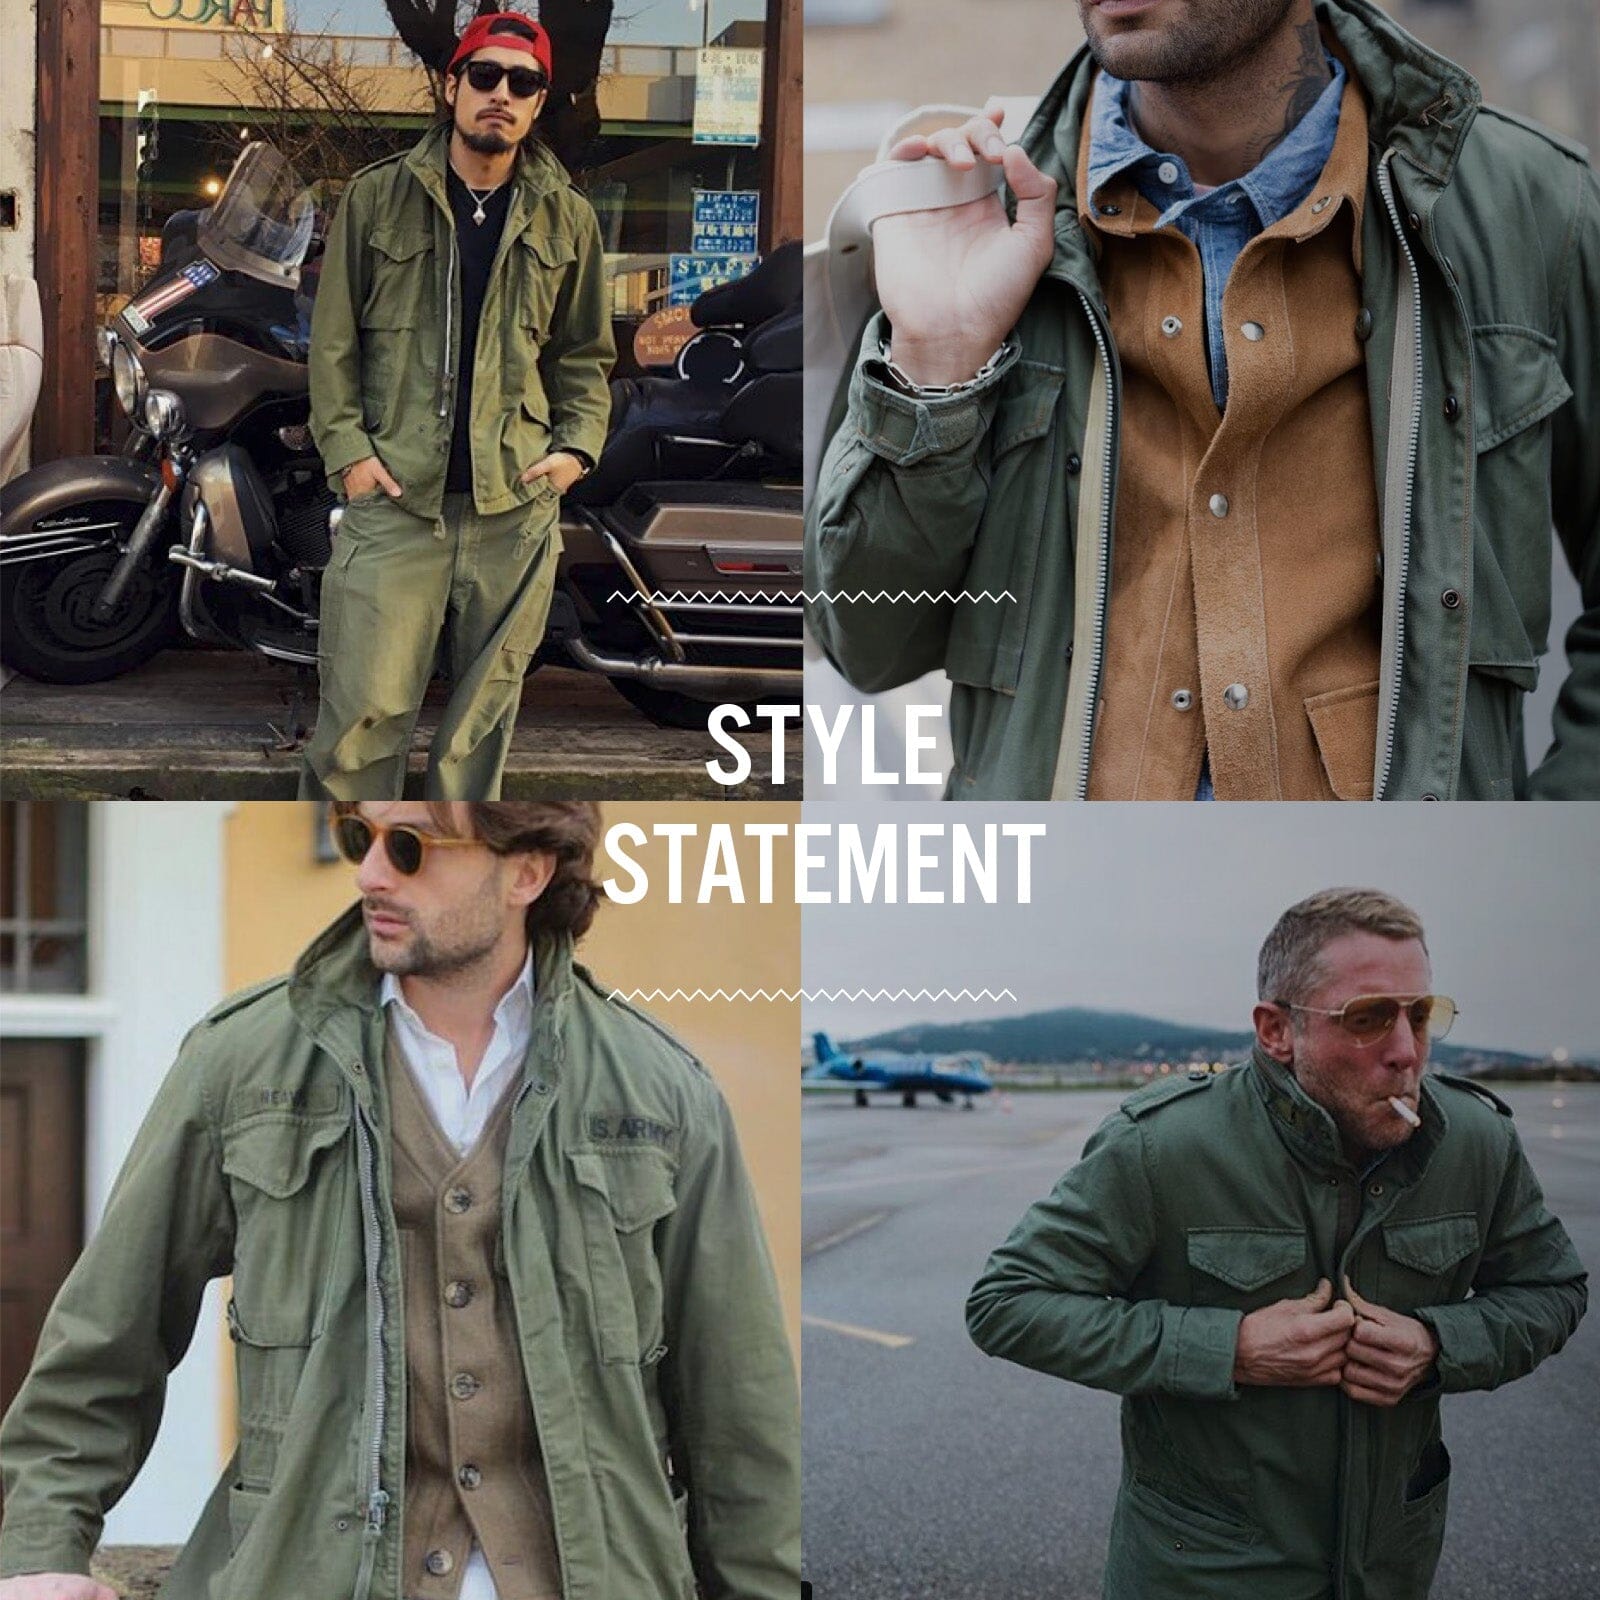 The M-65 Field Jacket - A truly universal style statement